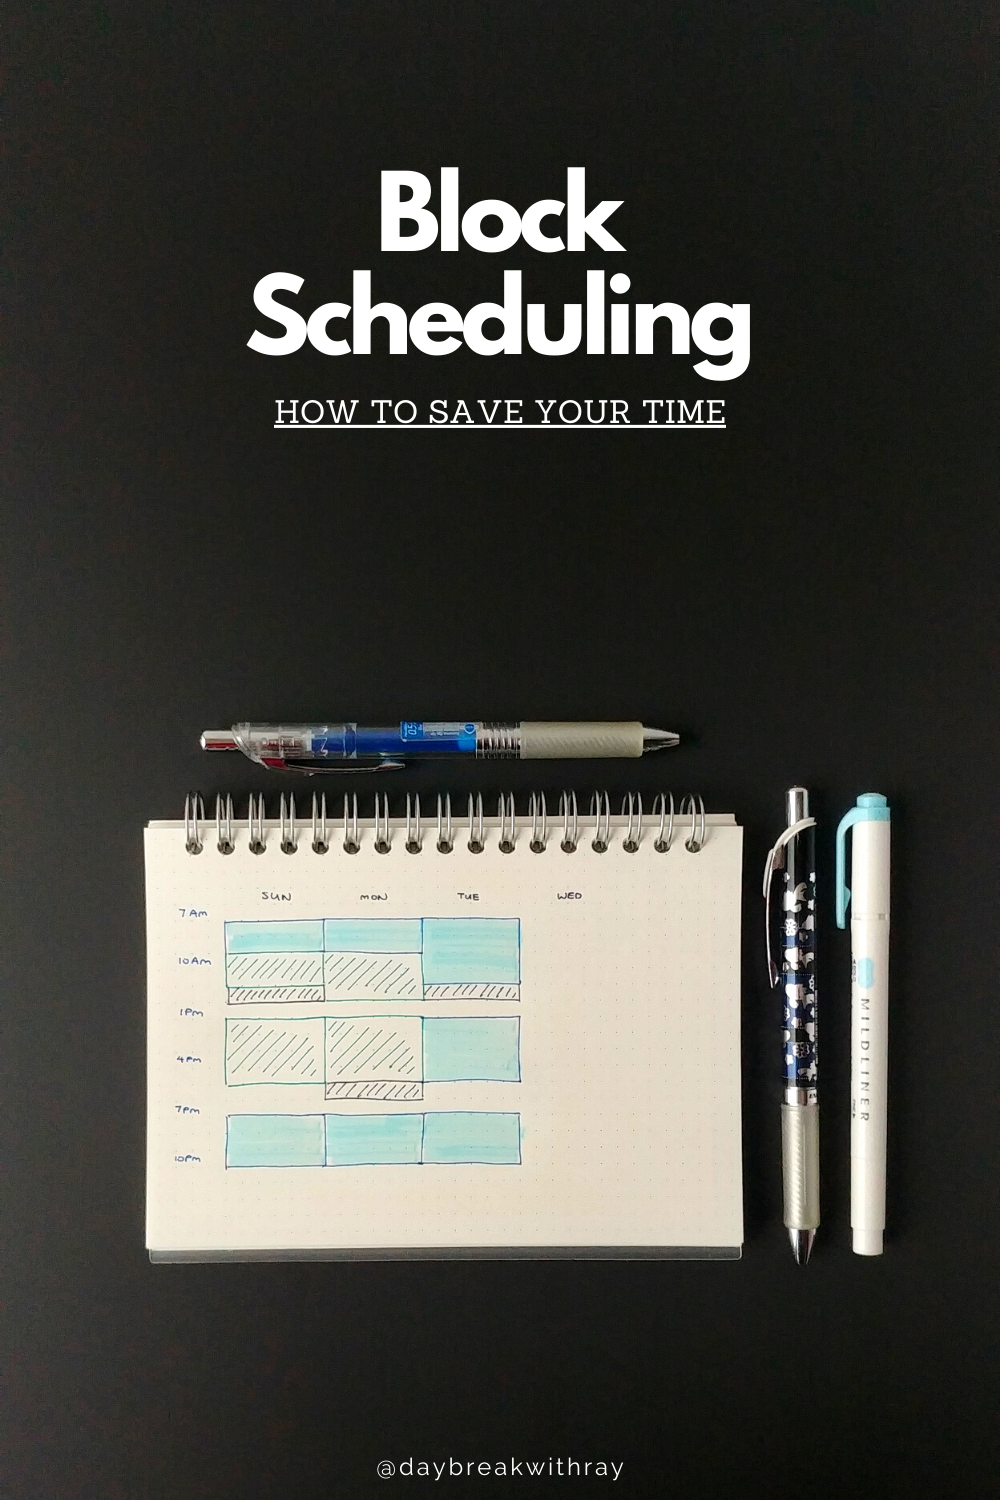 Start with writing down what tasks you need to get done, then estimate the duration and set an appropriate deadline. With a goal and deadline, you designate a time block and make adjustments if needed. Using this time block, you will put your full attention into completing the task you assigned yourself. Put away any distractions and focus. Your productivity level will increase, saving you hours of procrastination and lazing around.